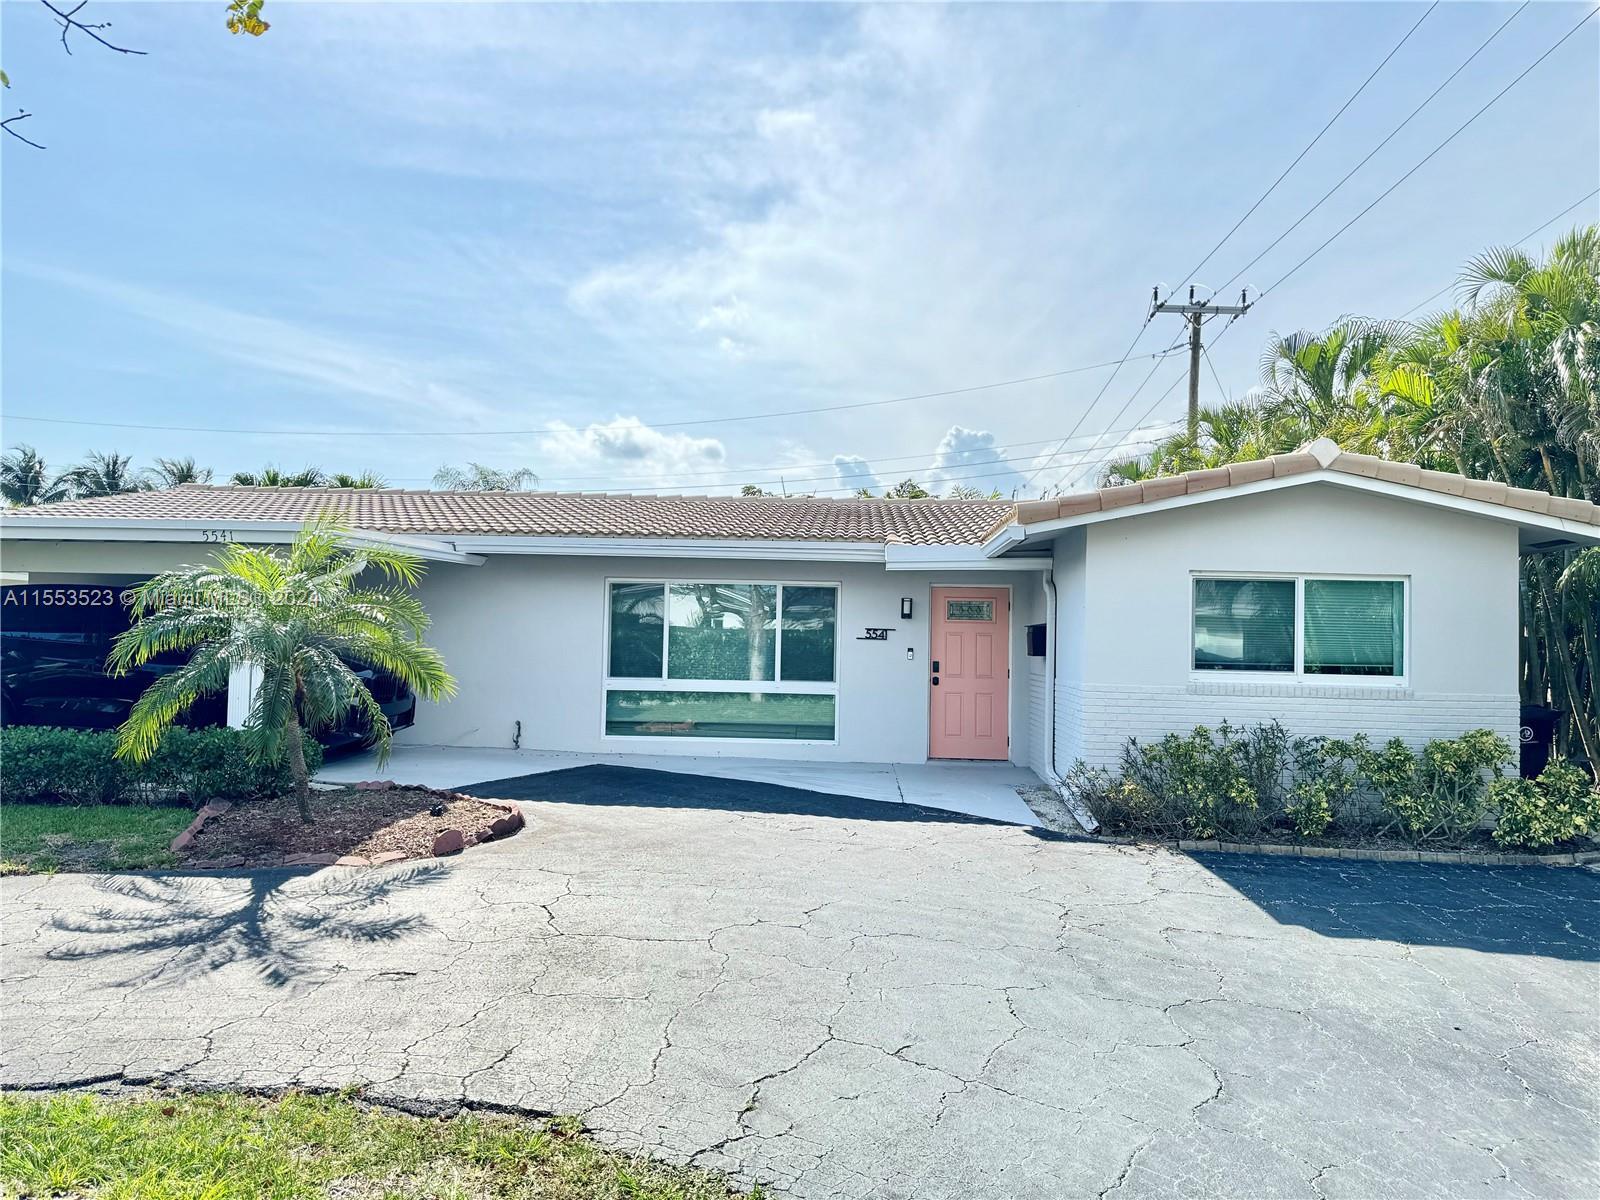 Photo of 5541 NE 19th Ave in Fort Lauderdale, FL